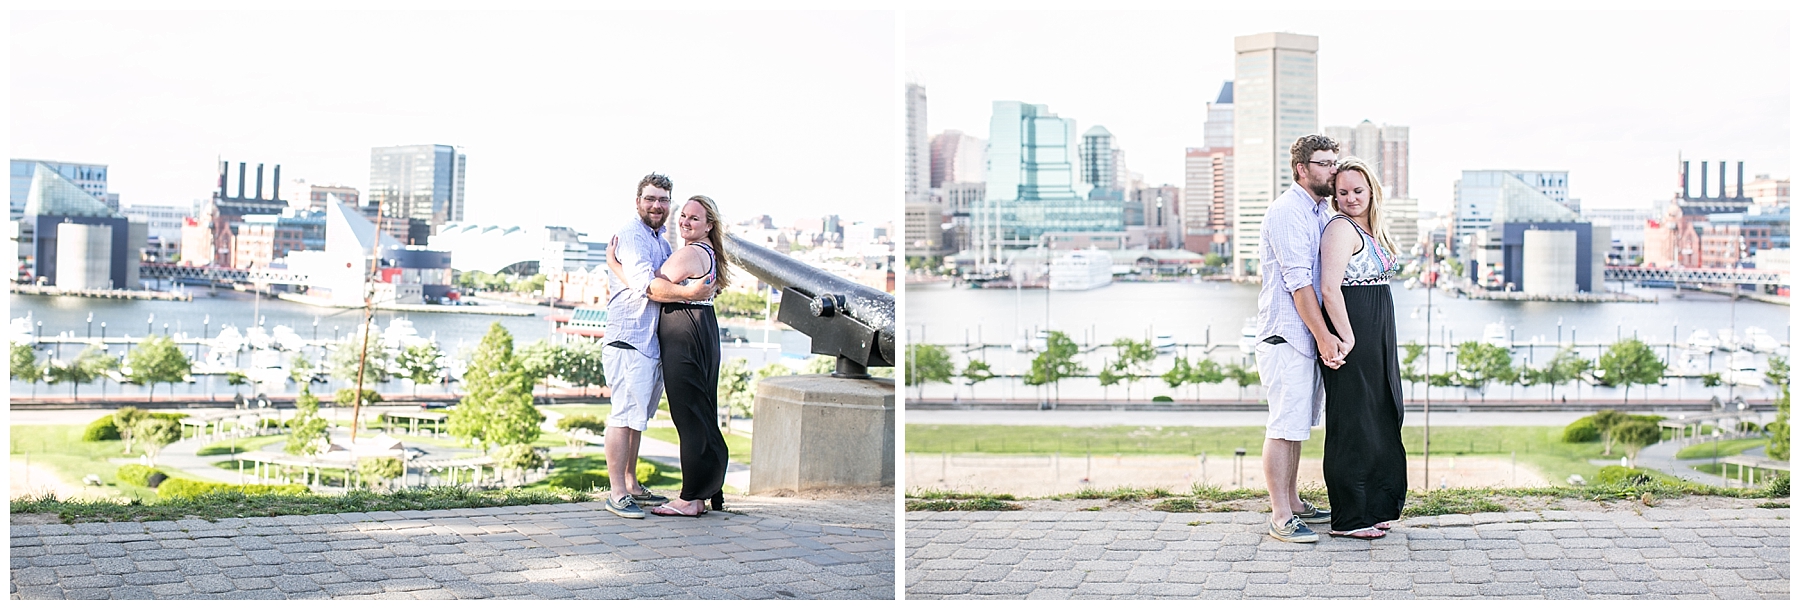 Tess Ray Camden Yards Engagement Session Living Radiant Photography photos_0041.jpg